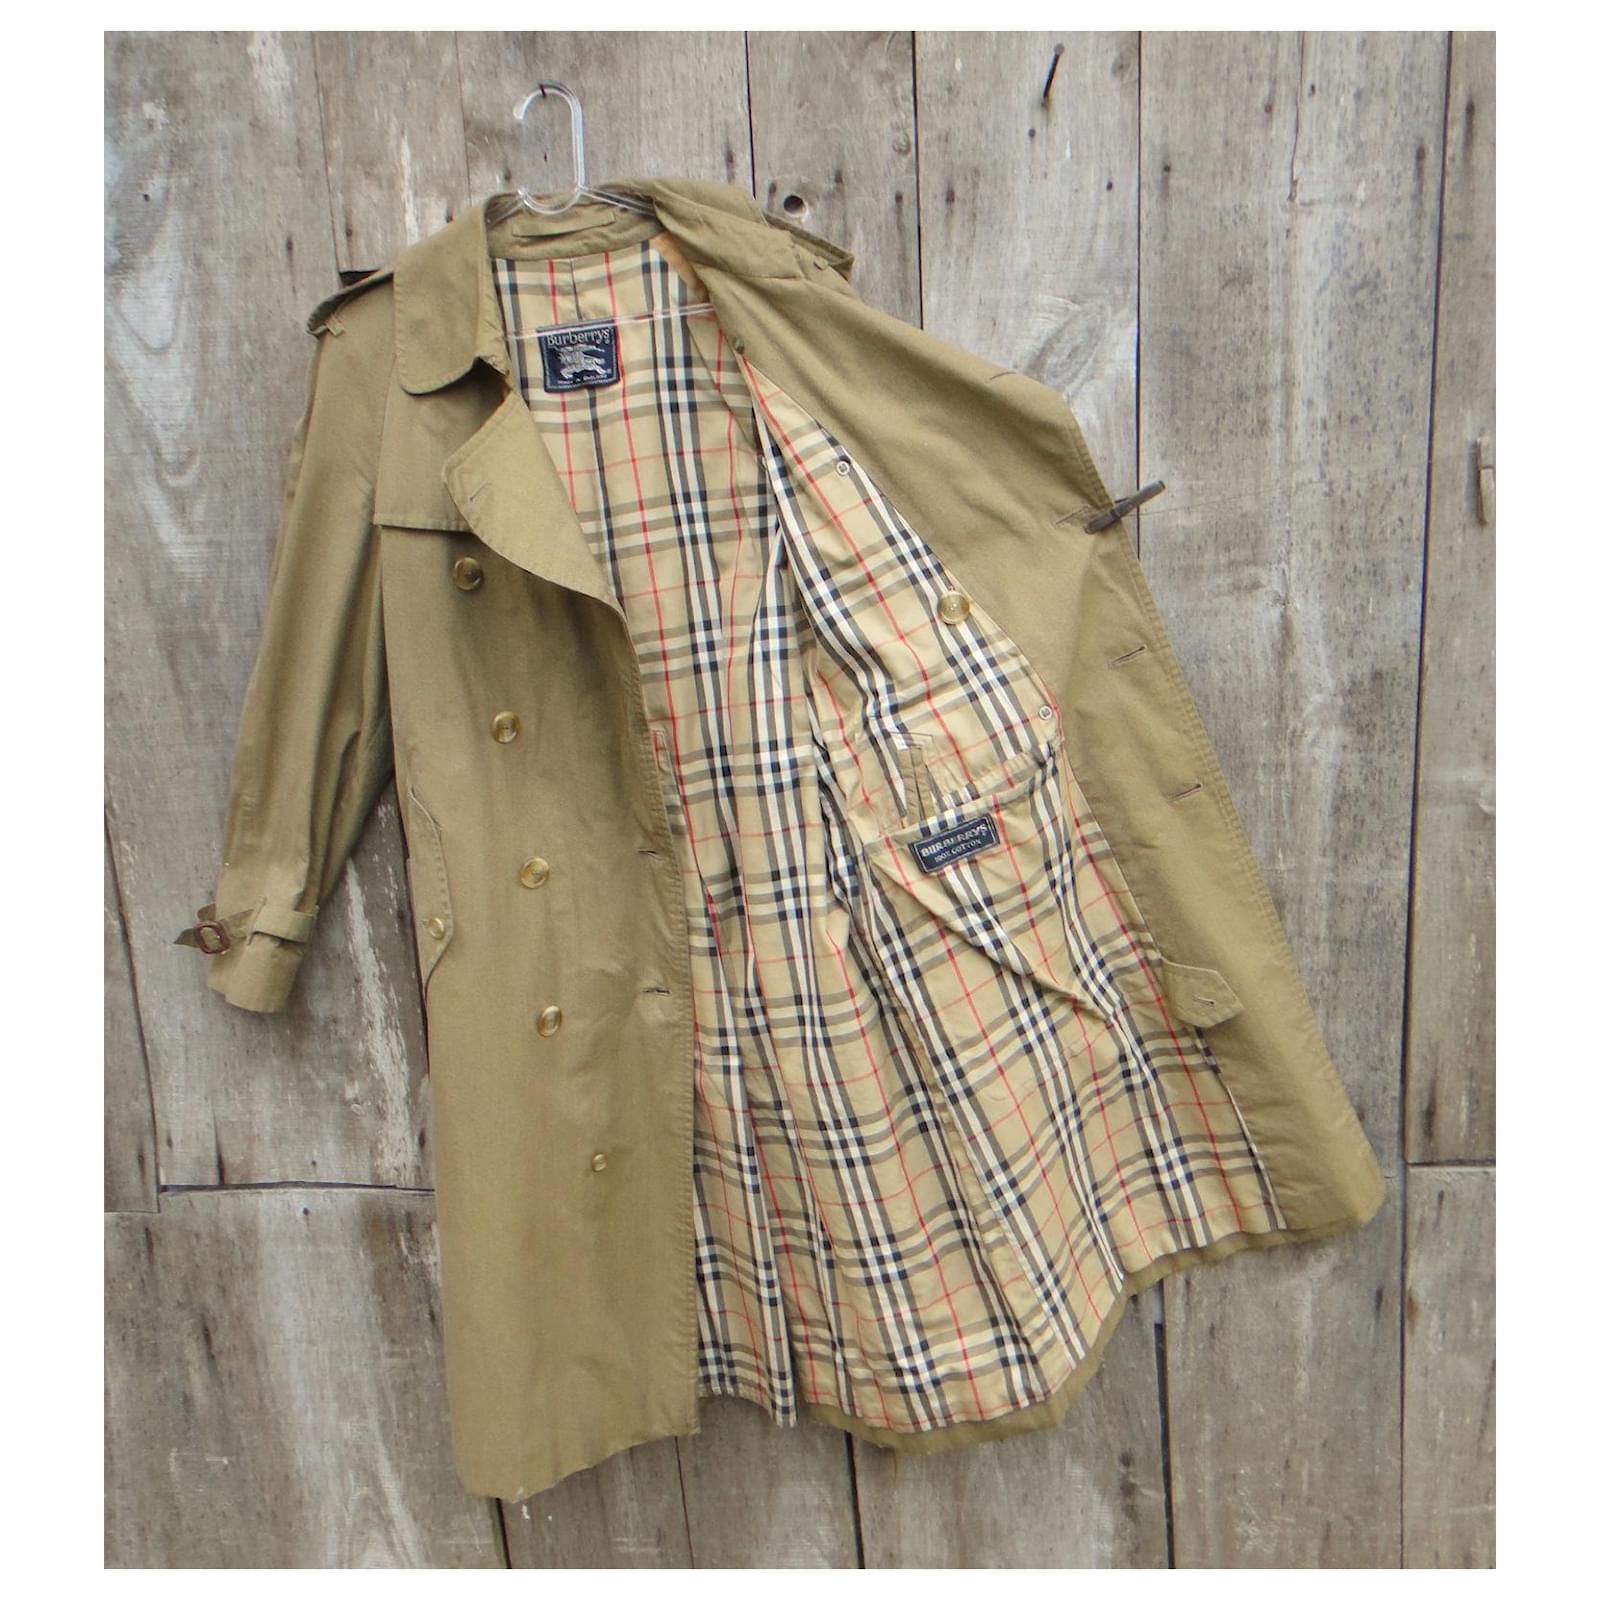 Vintage Burberrys Trench, Is this real?